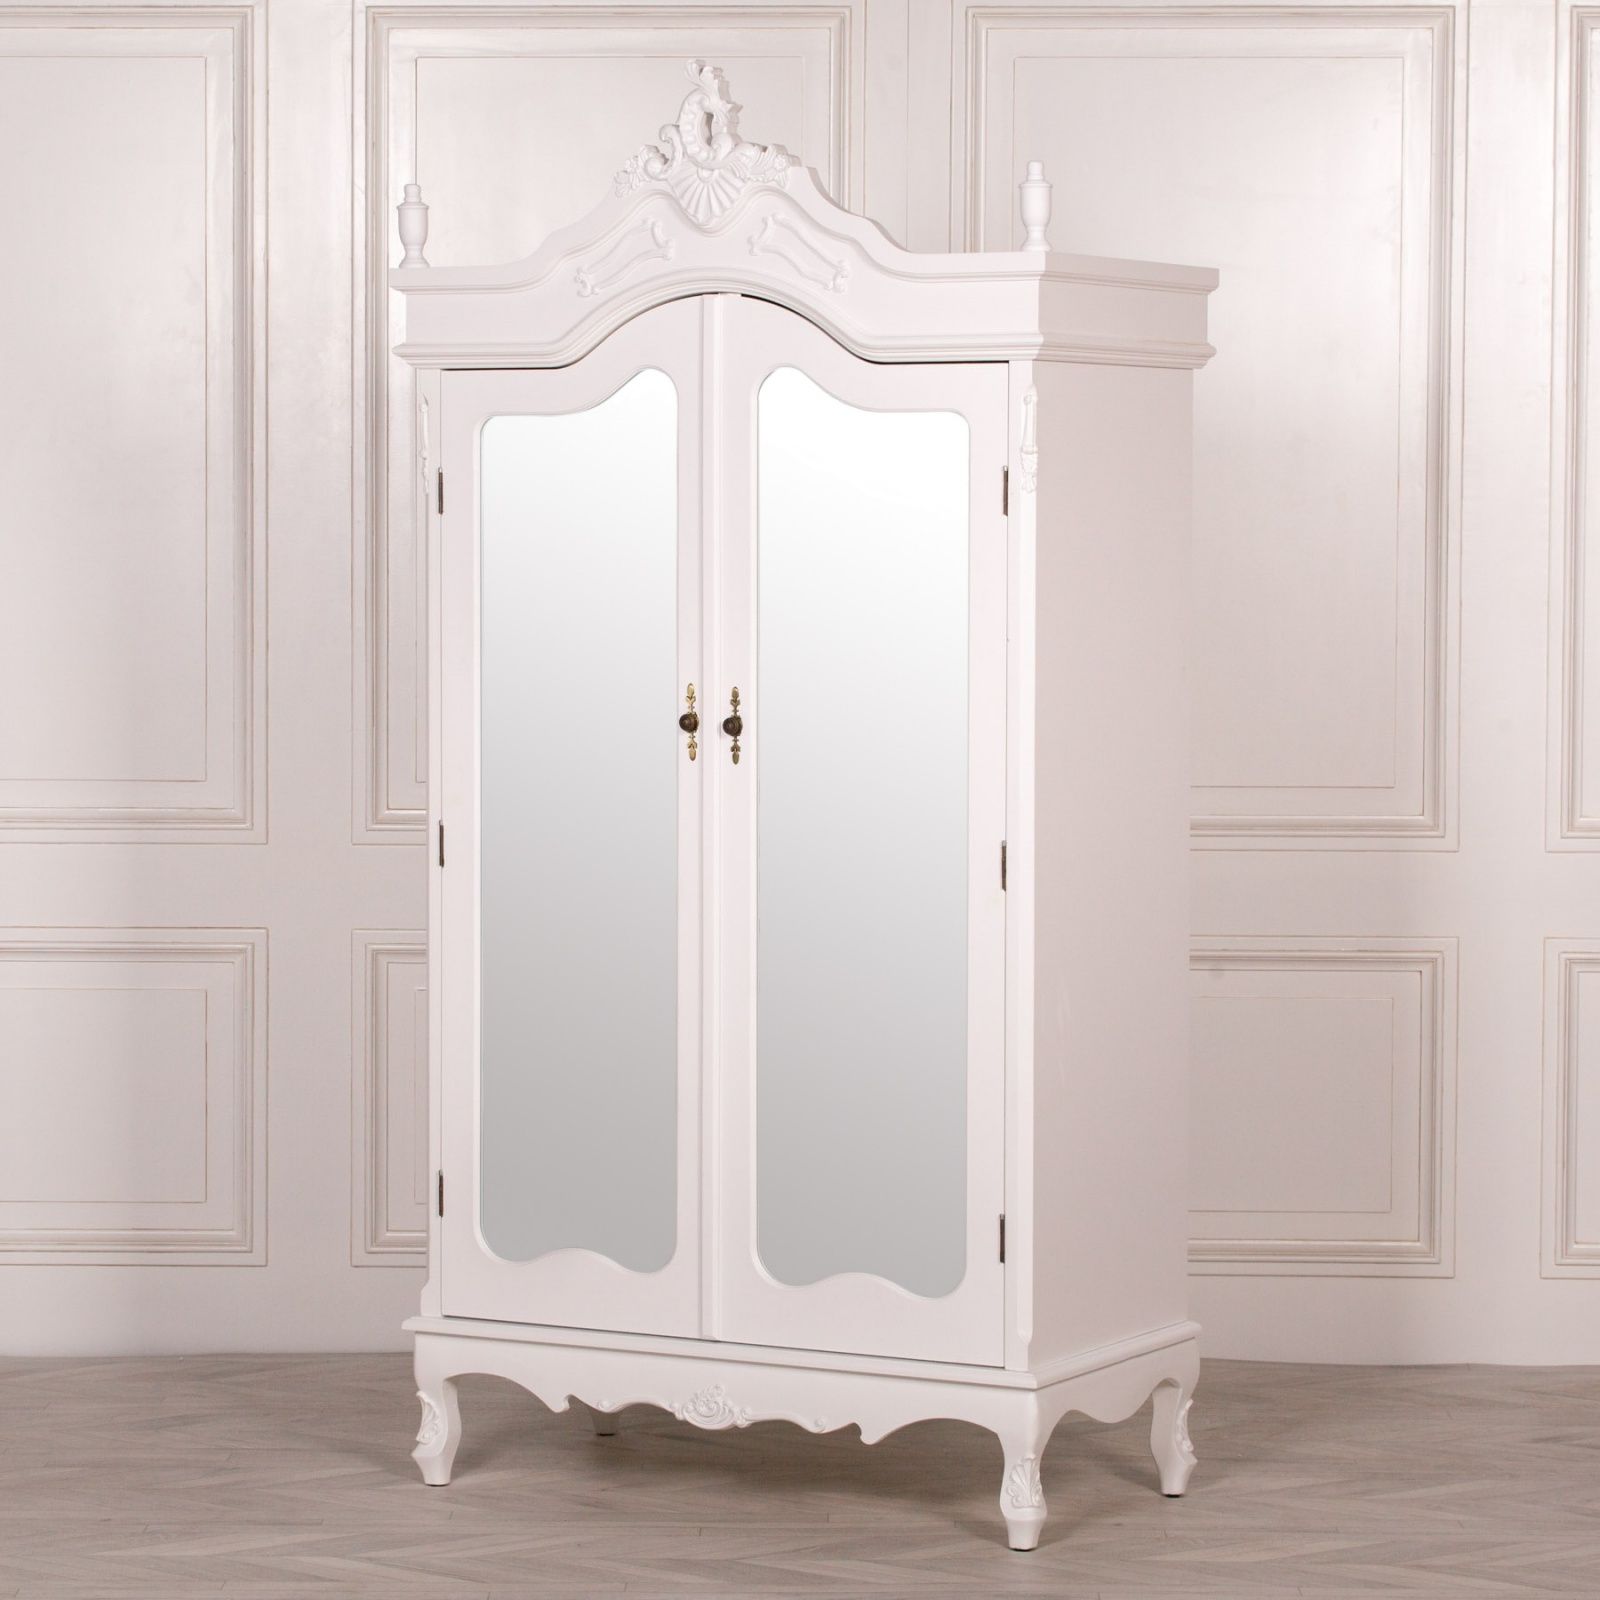 French Style Wardrobe White Mirrored Double Armoire Pertaining To French Wardrobes (Gallery 5 of 20)